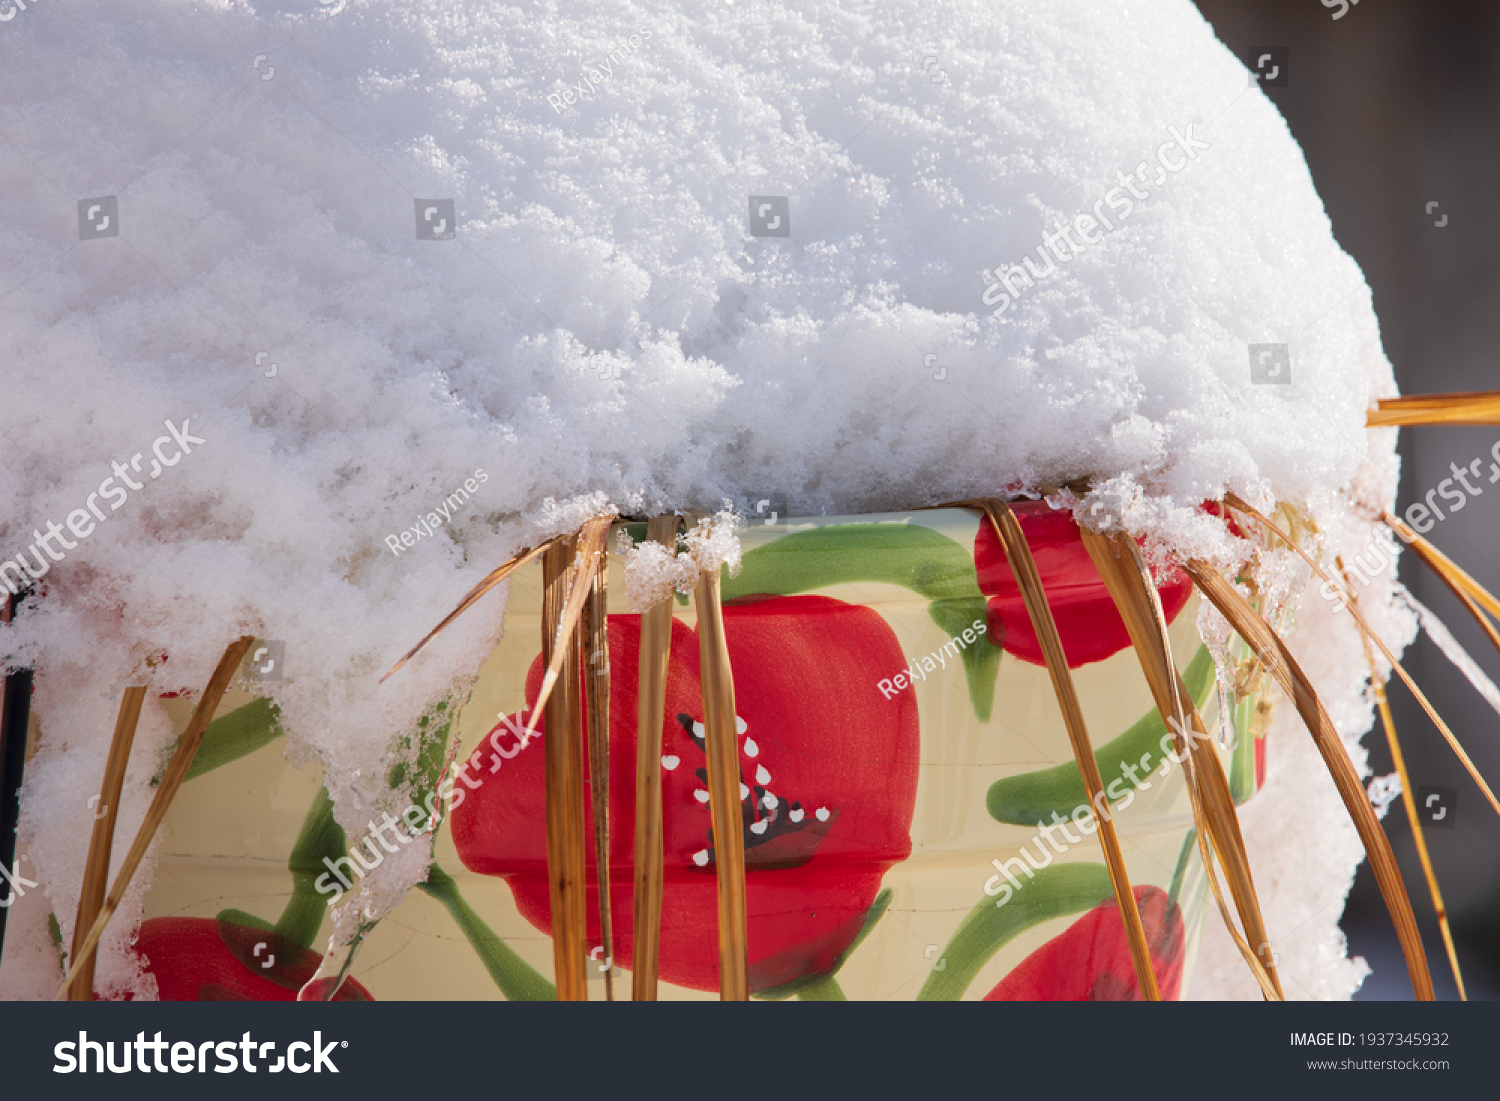 Snow covered flower pot with snow build up around it.  Drifted snow on top of large floral flower pot.   #1937345932